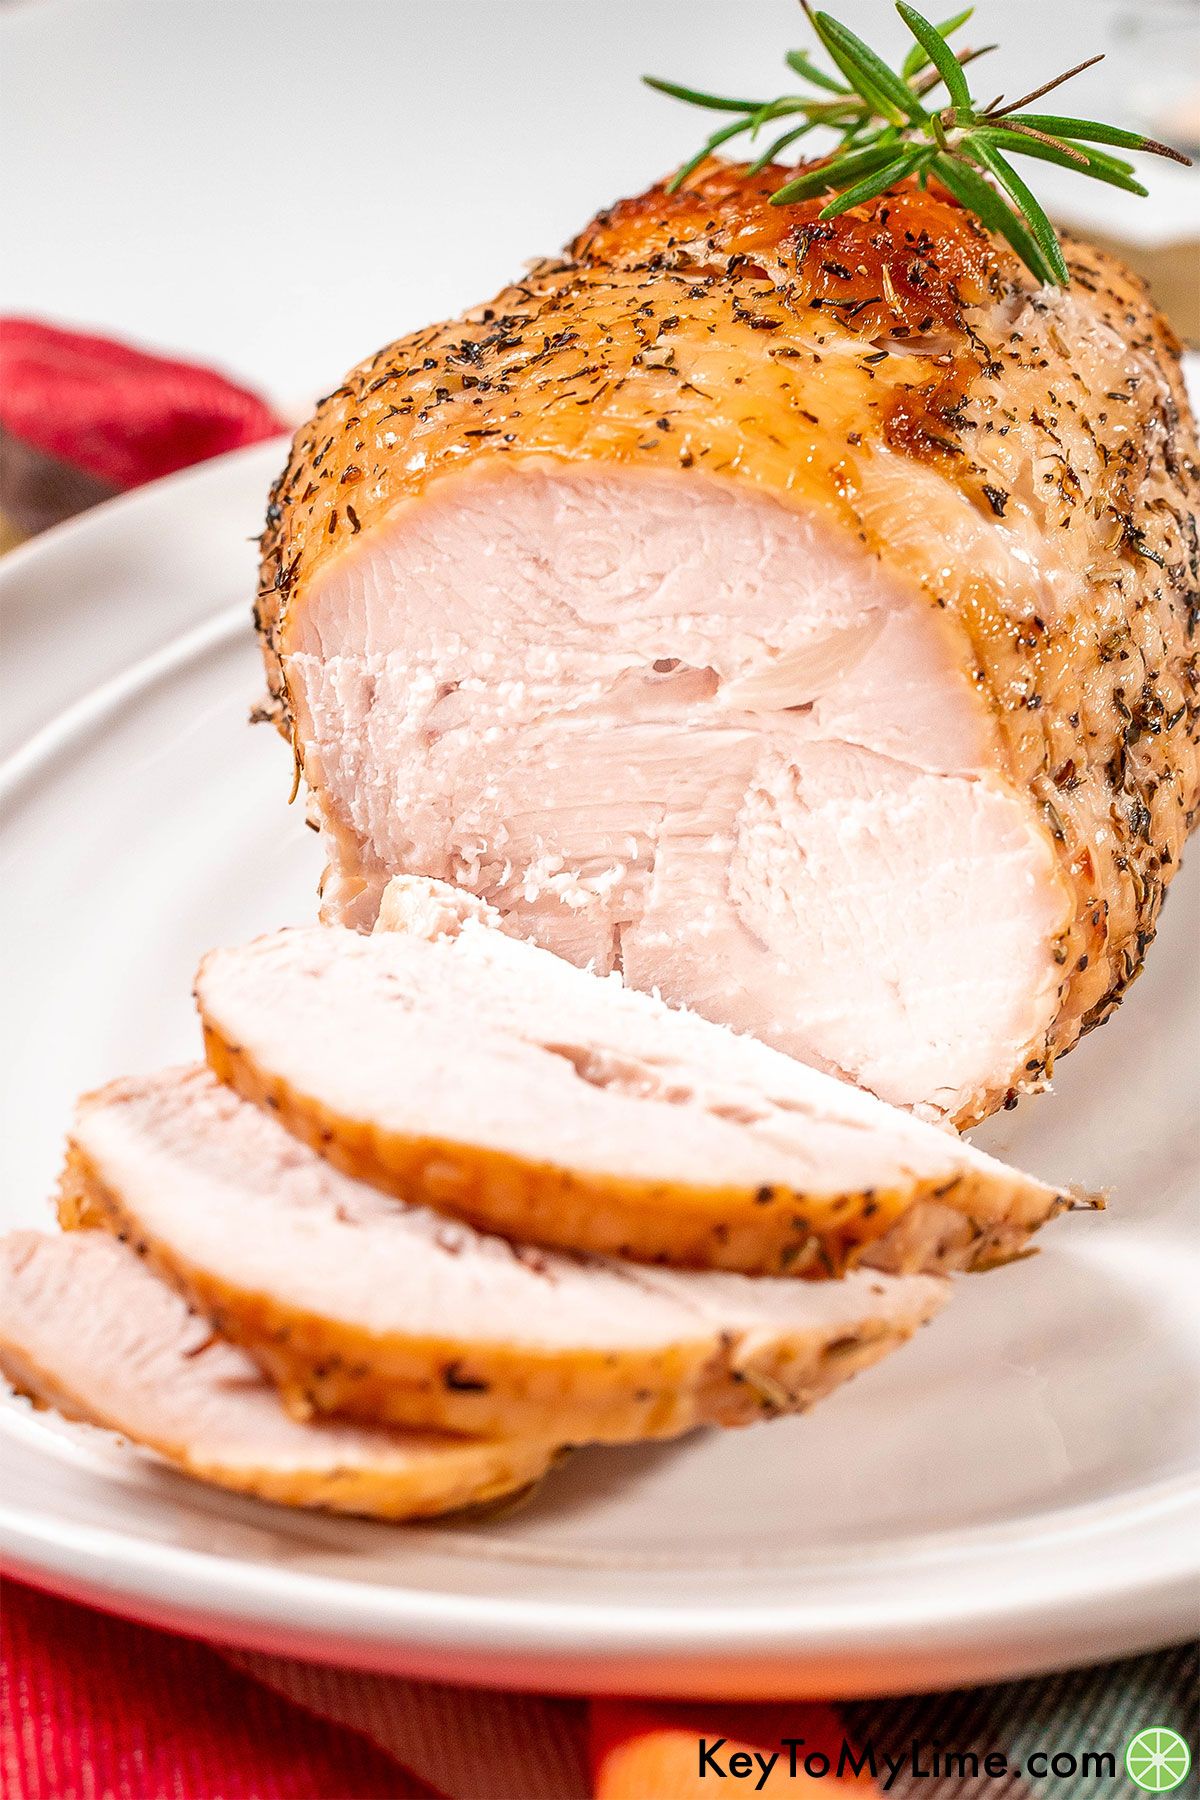 A close up image of multiple slices of turkey breast on a white platter.